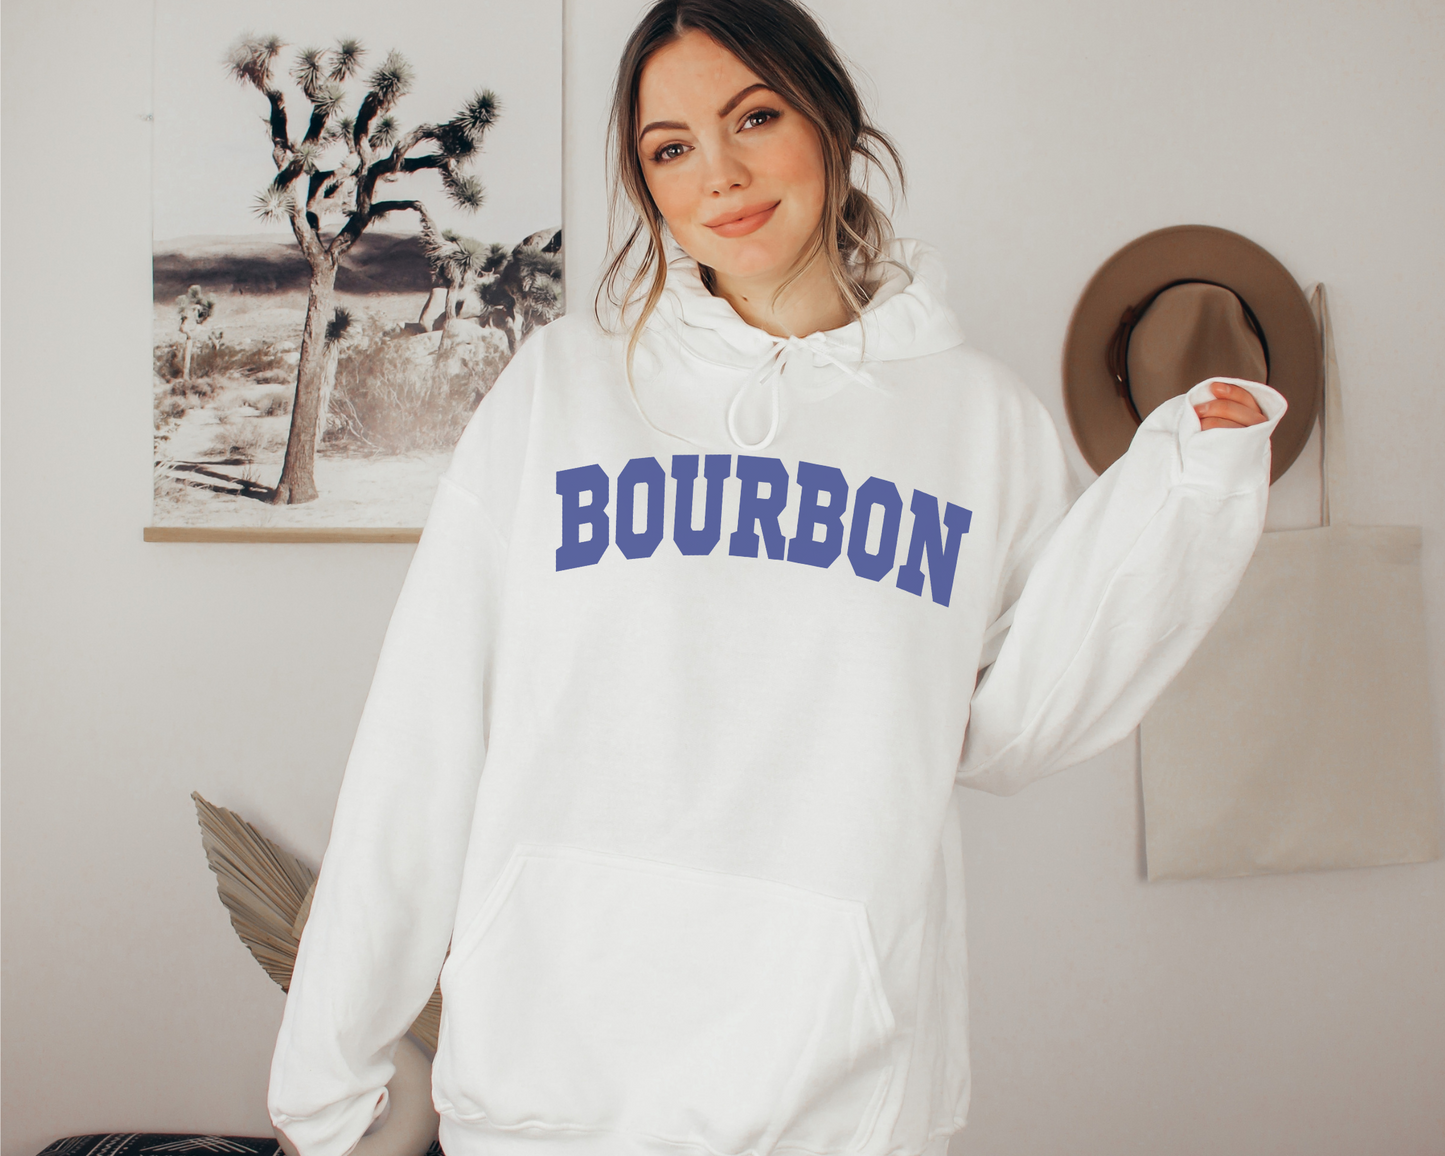 Bourbon Hoodie in White on a Female